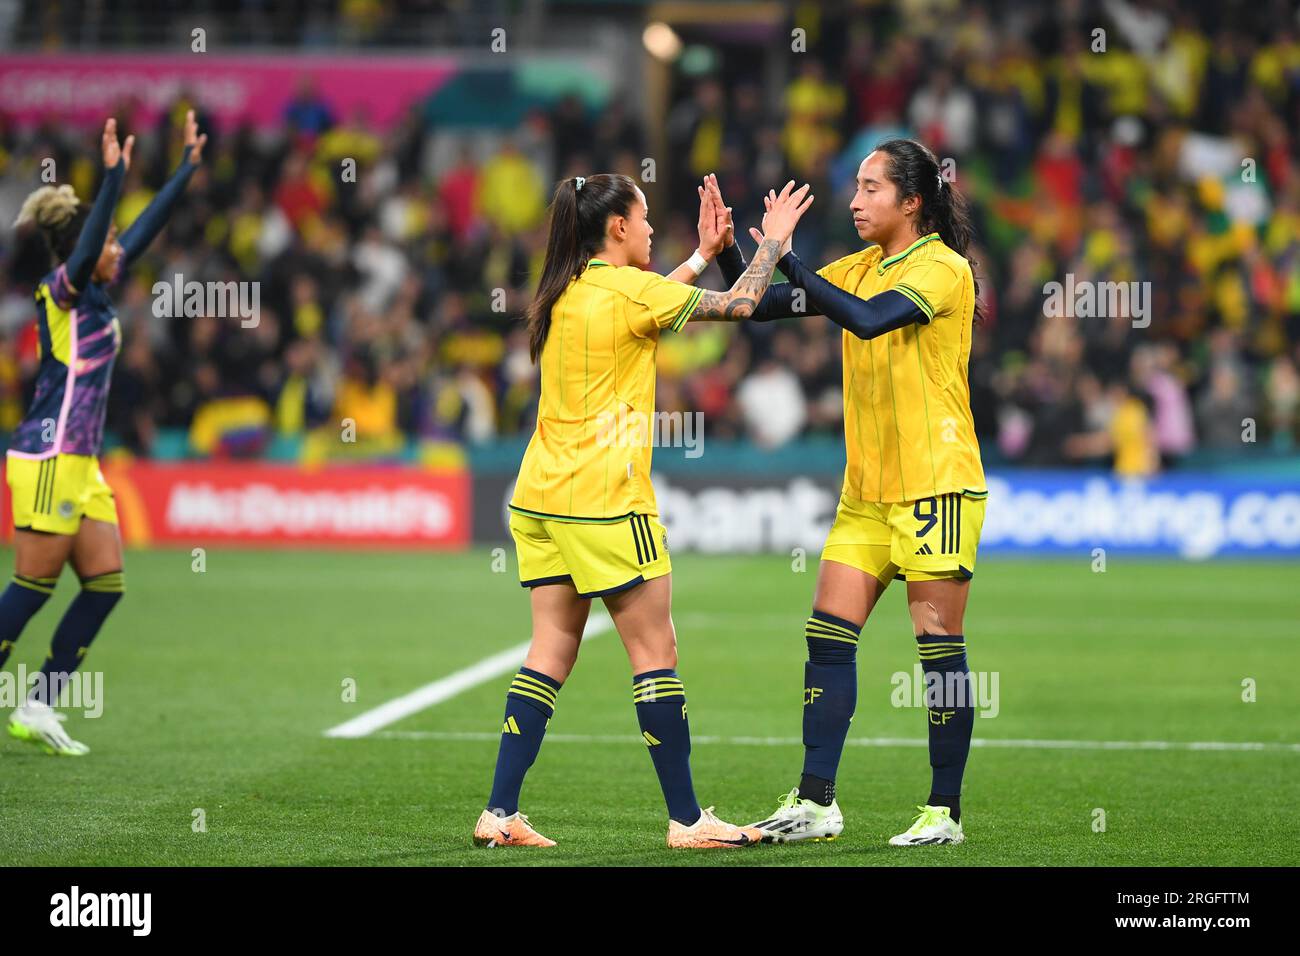 Melbourne, Australia. 08th Aug, 2023. Marcela Restrepo (L) and Mayra Ramírez (R) of Colombia are seen in action during the FIFA Women's World Cup 2023 Round 16 match between Colombia and Jamaica at the Melbourne Rectangular Stadium. Final score Colombia 1:0 Jamaica. Credit: SOPA Images Limited/Alamy Live News Stock Photo